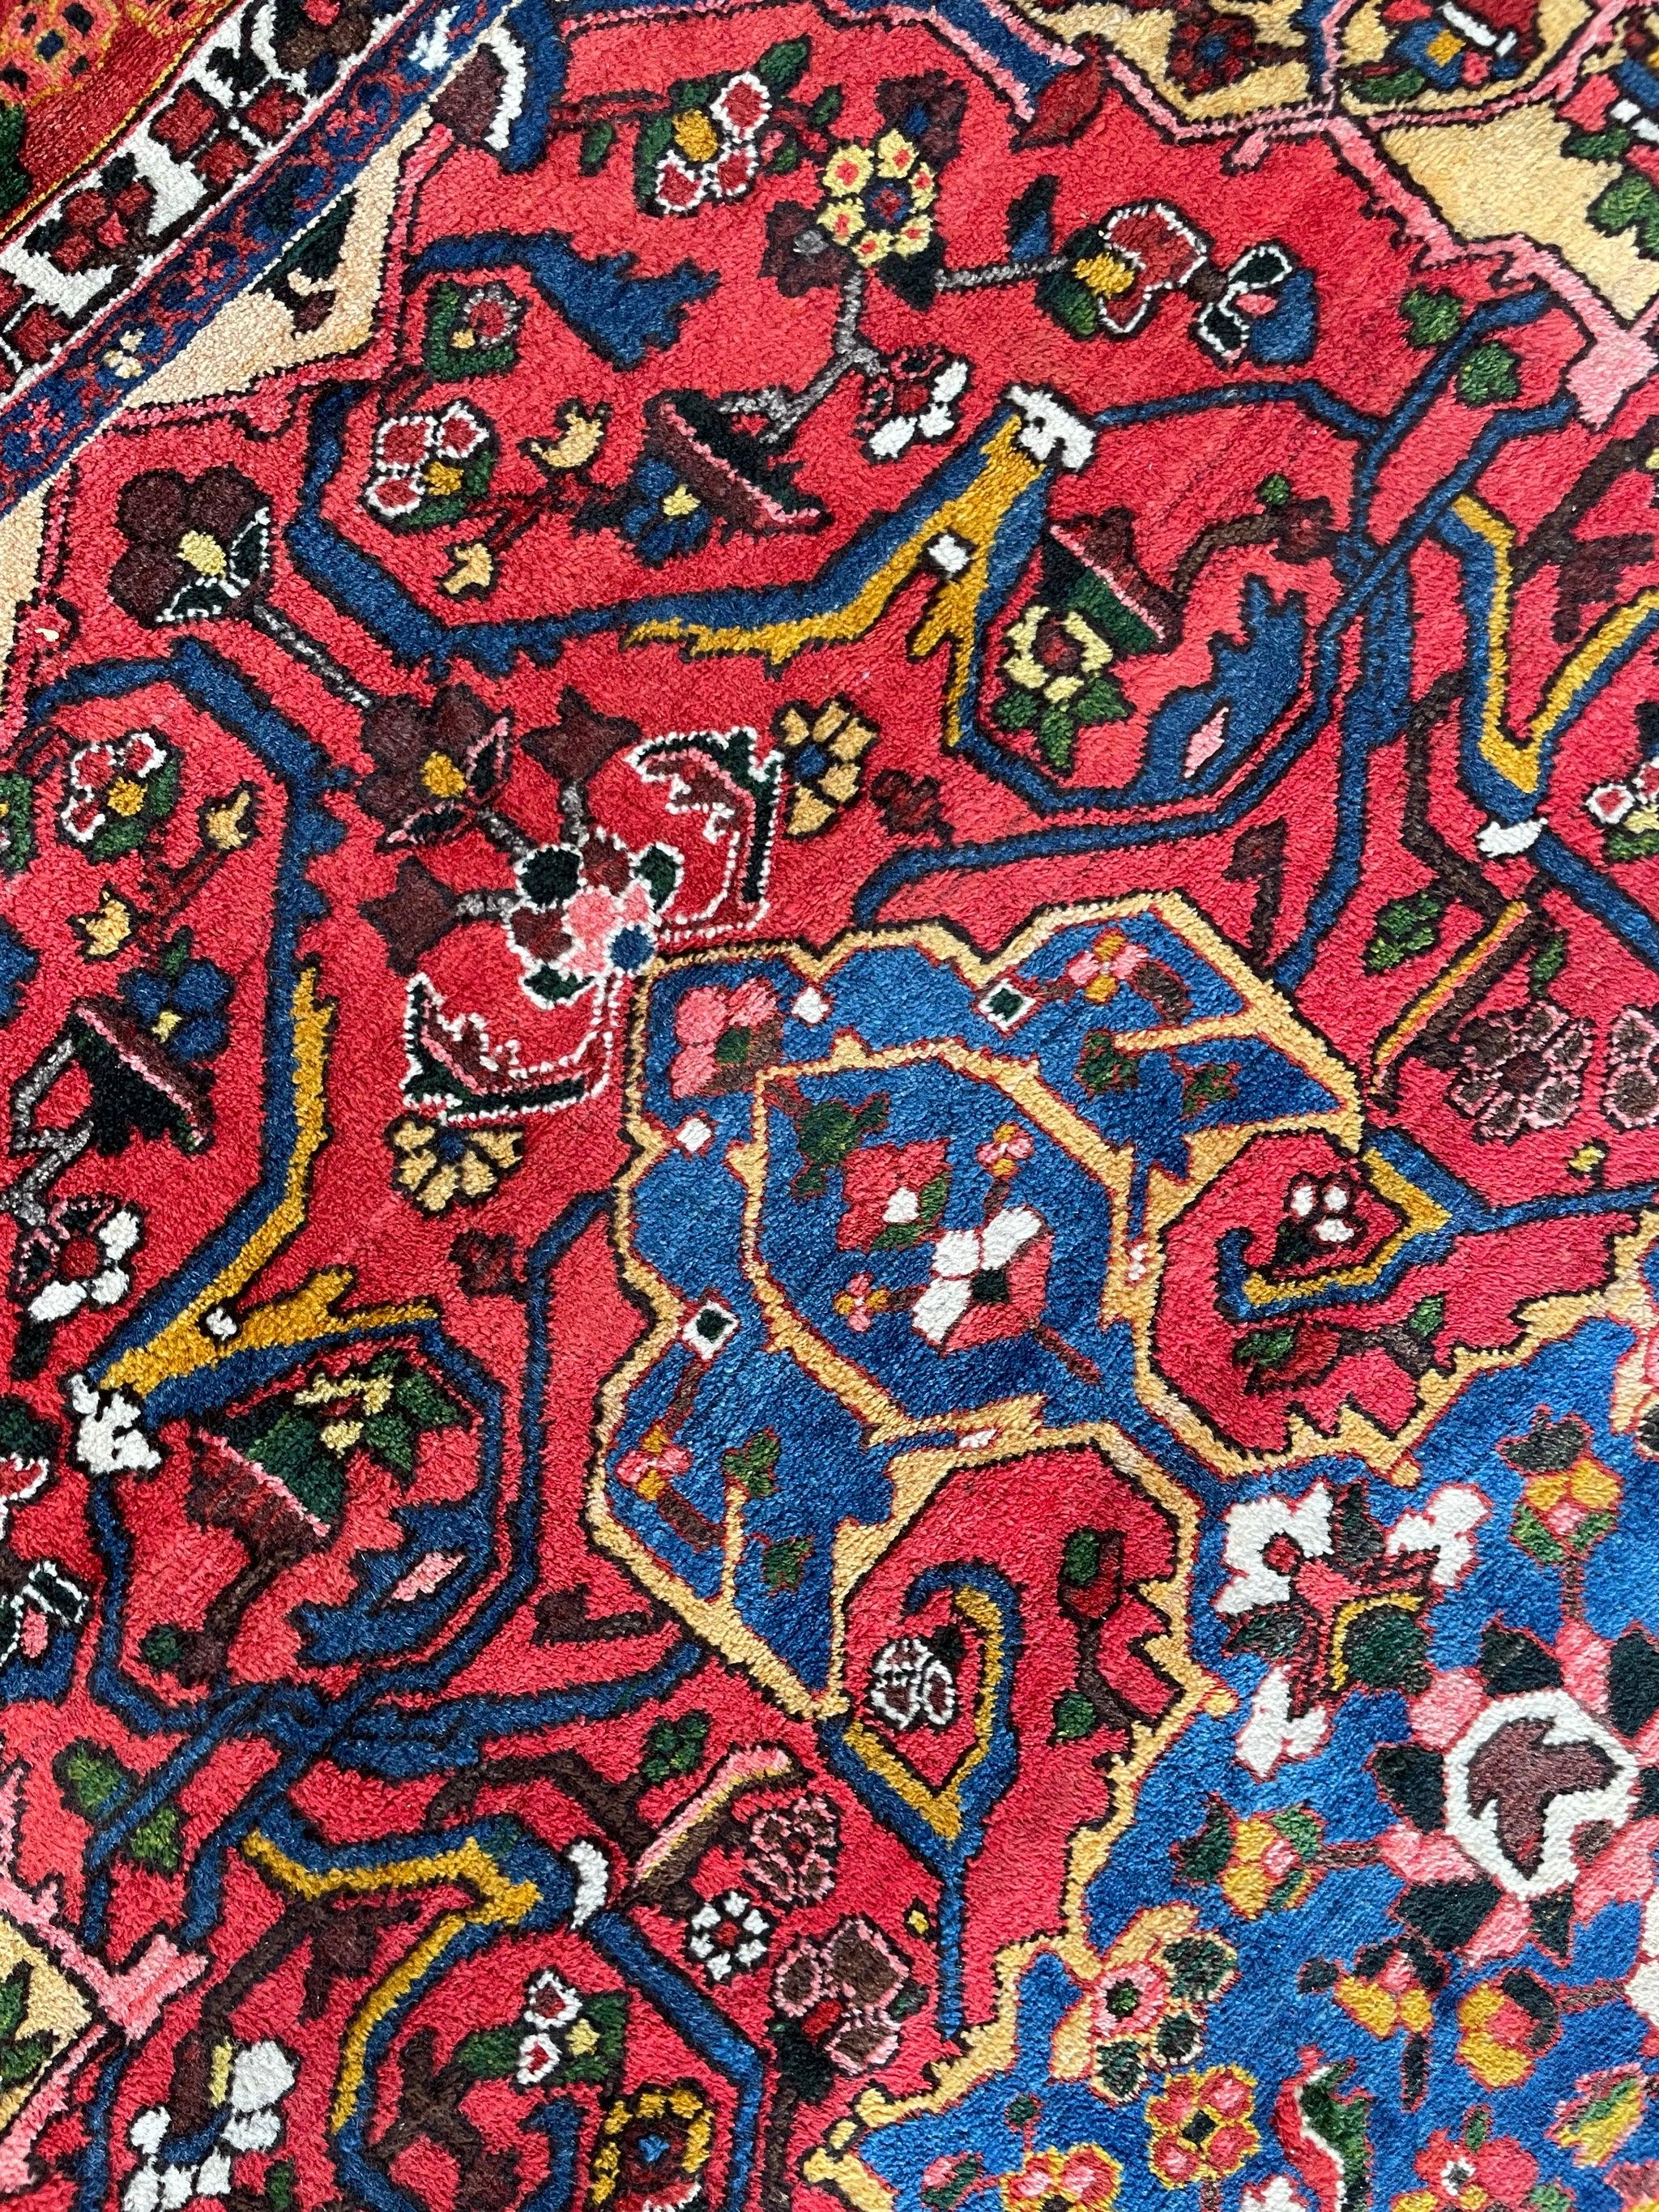 Colorful Palace size vintage beauty with tribal & old-world charm strawberry, watermelon, saffron-wheat, blues, greens, grey, taupes

About: Huge palatical beauty - palace size or mansion size piece that is a perfect size to anchor a room and to